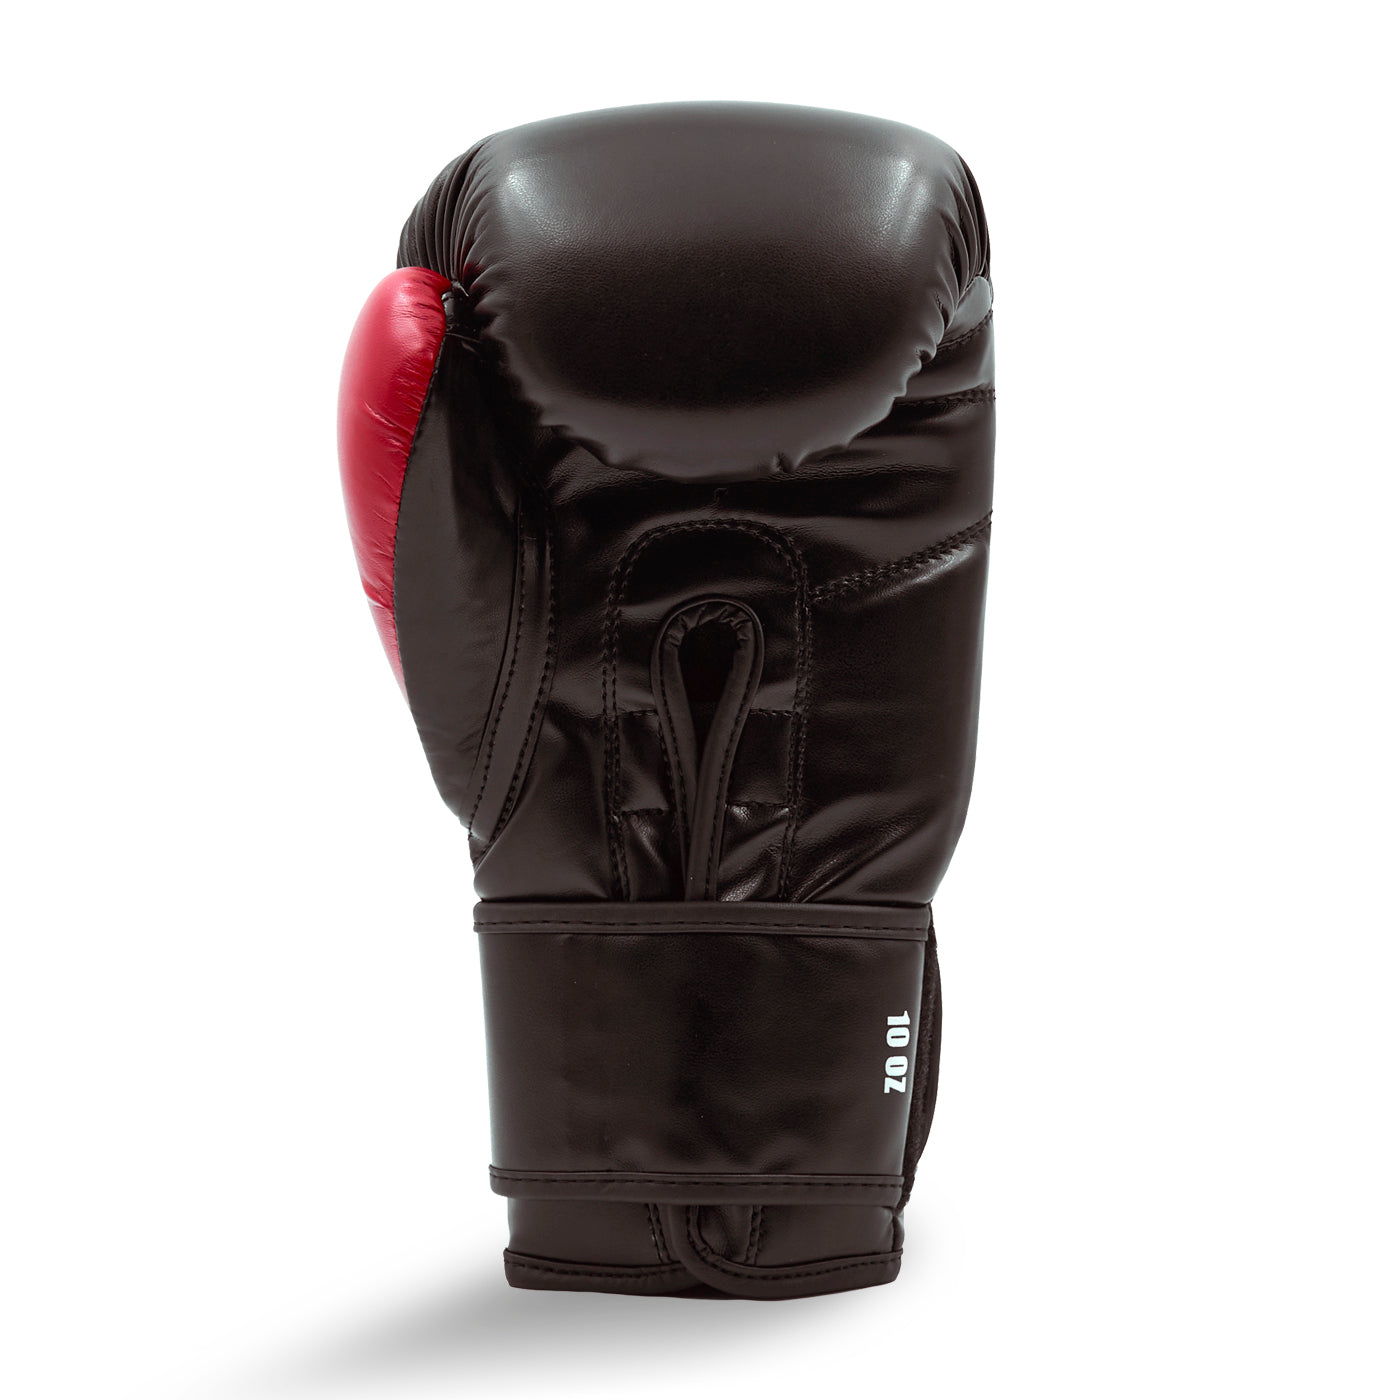 Junior Synthetic Leather Training Glove Black / Red